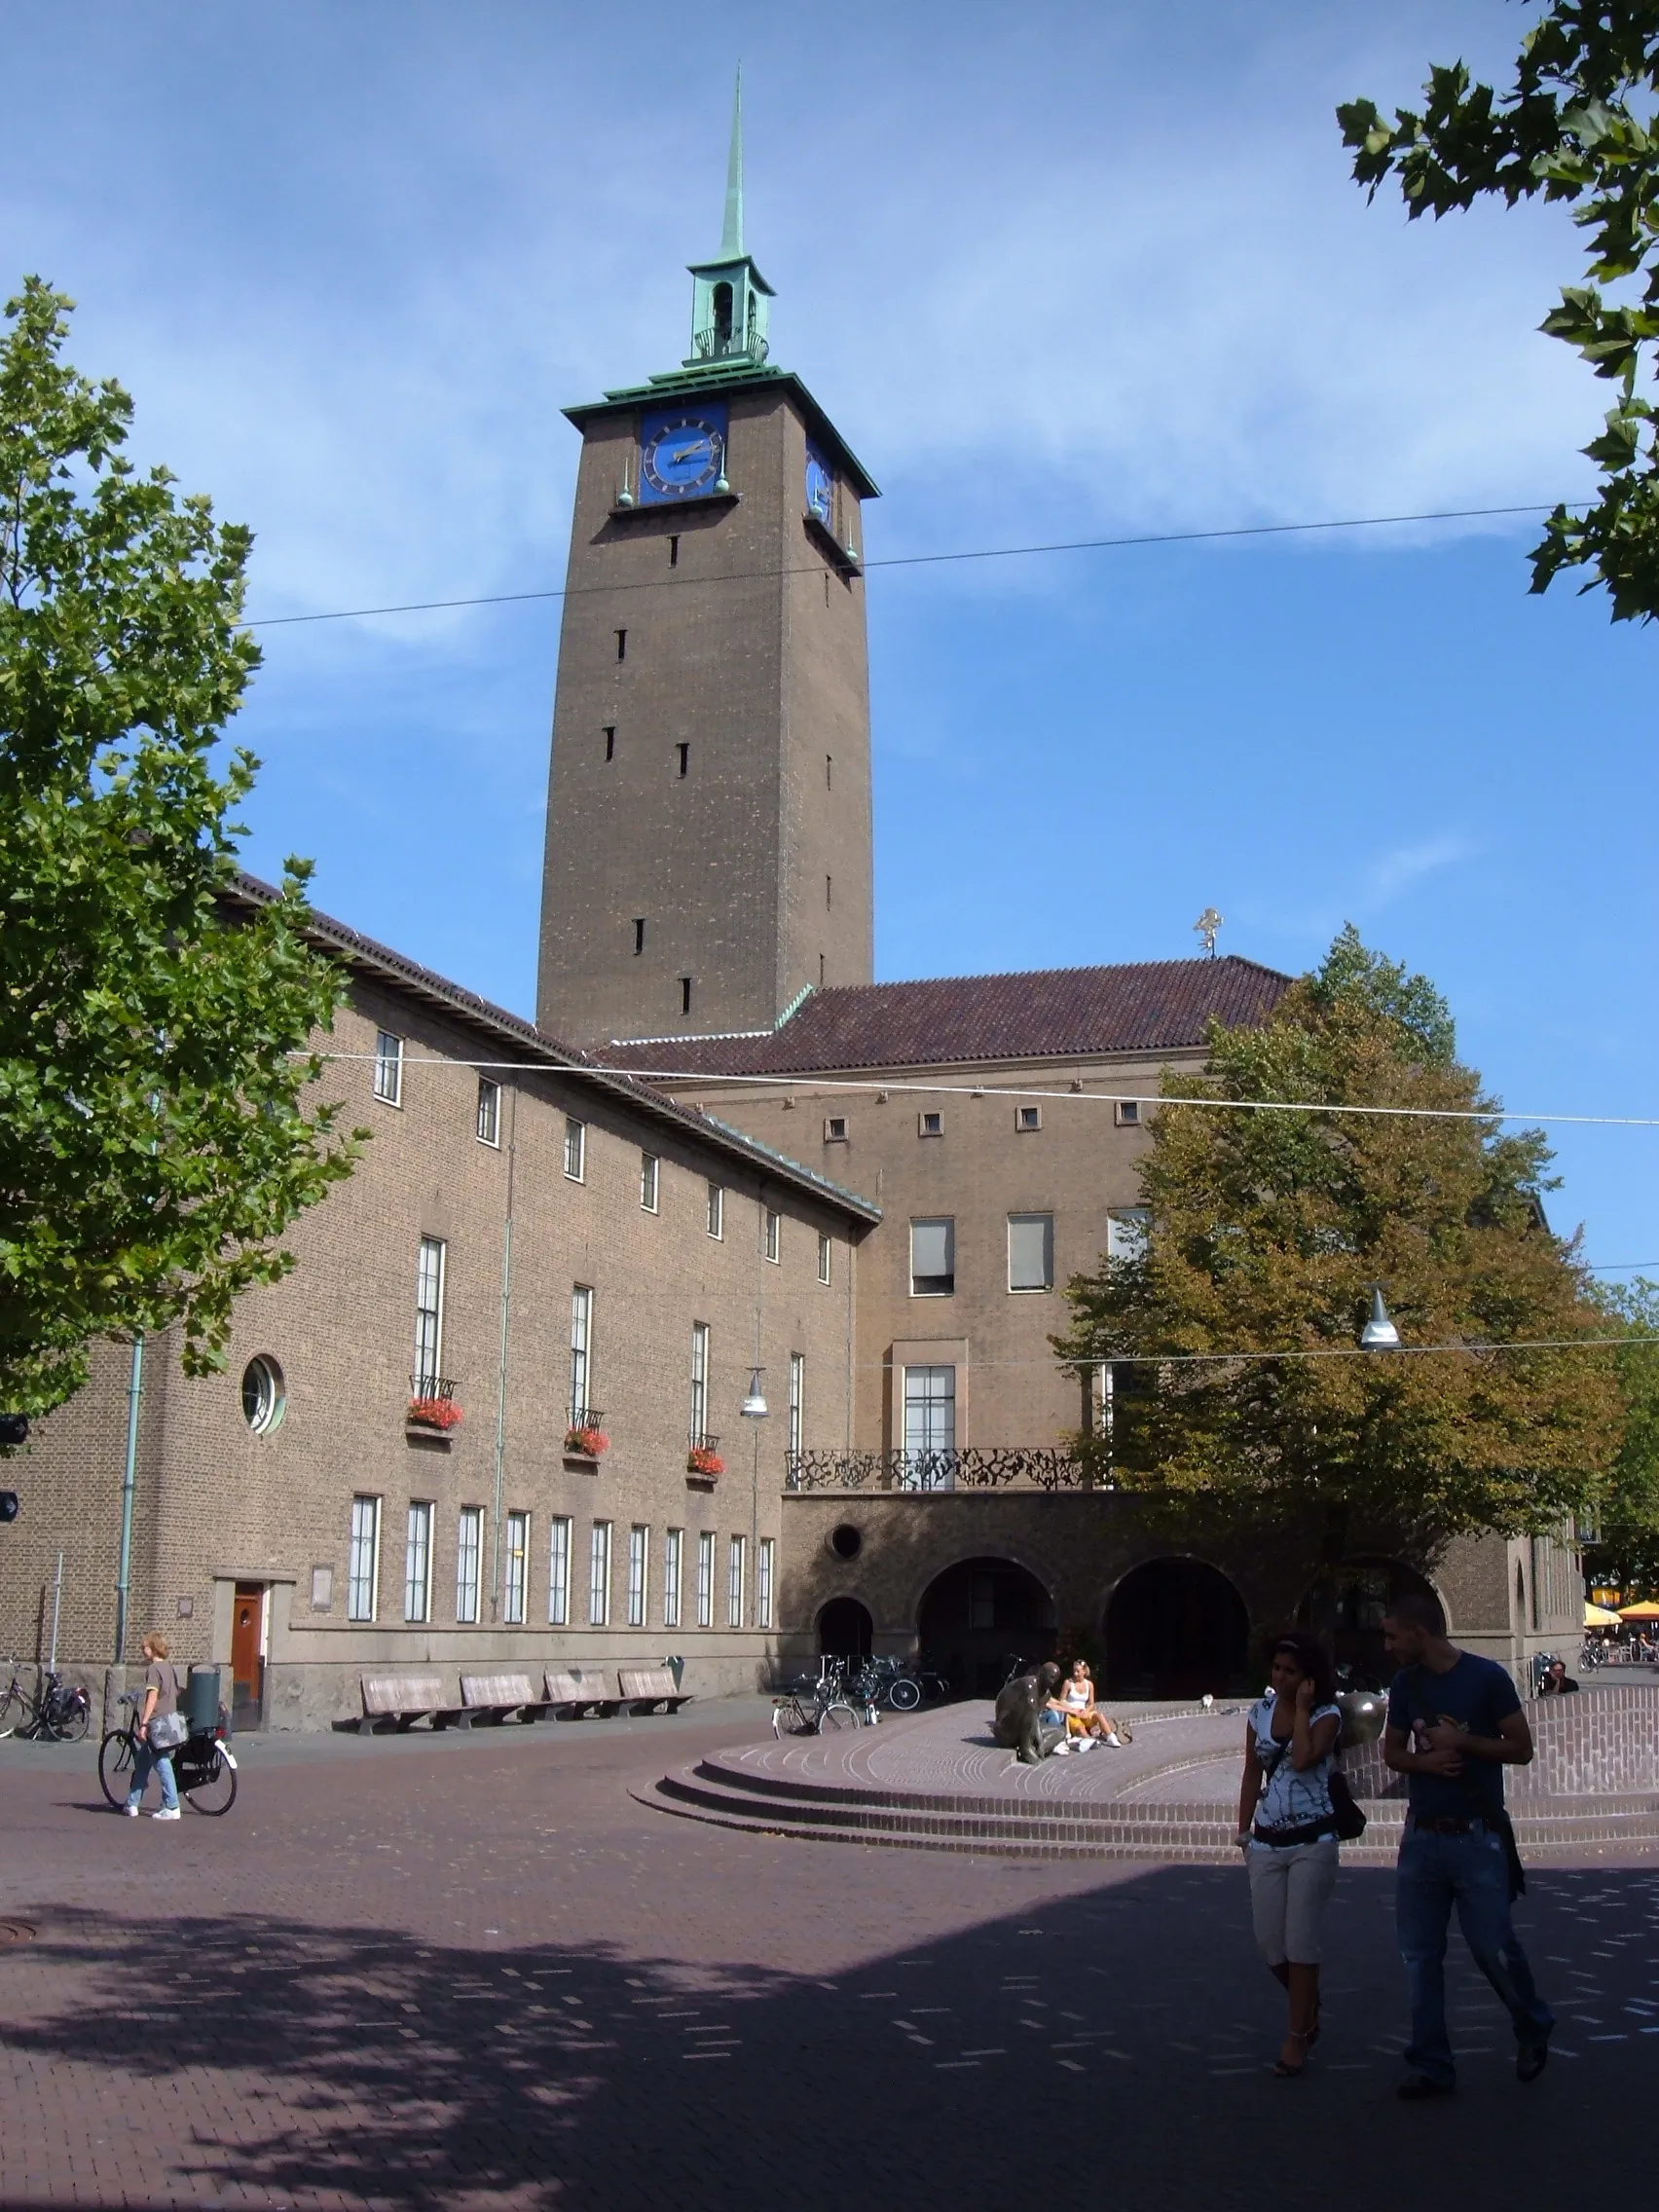 Photo showing: Townhall of Enschede